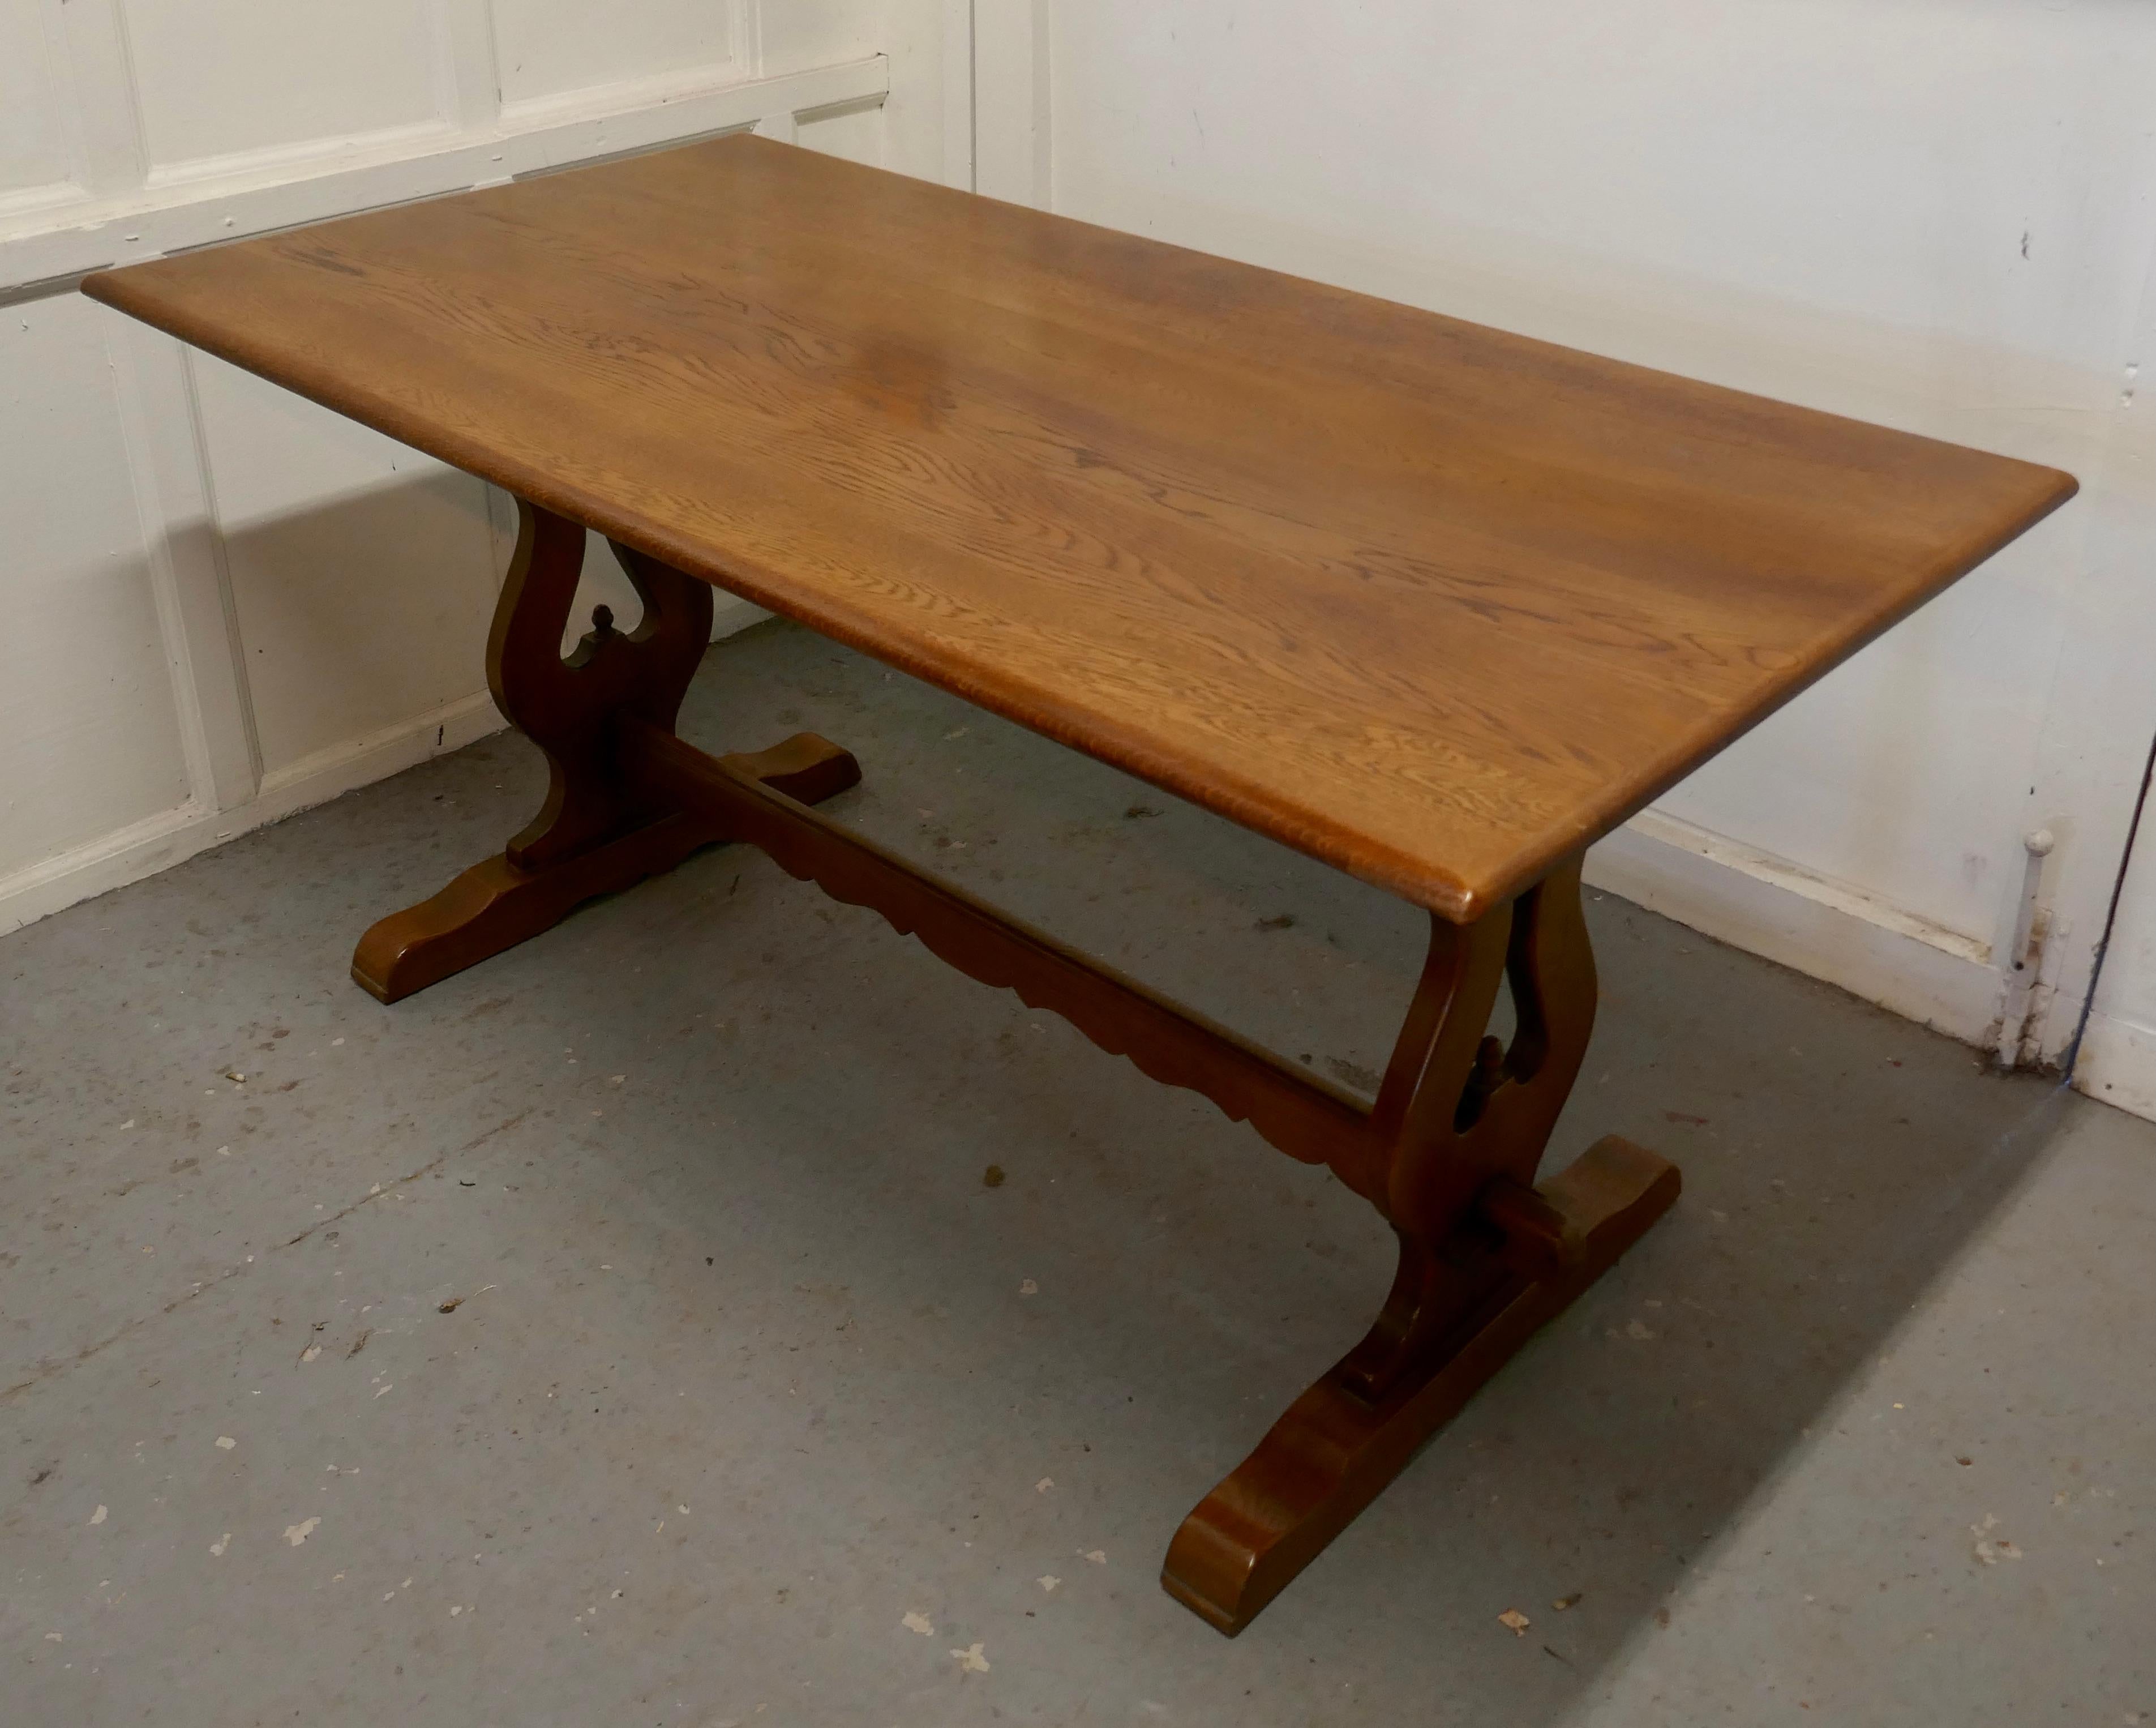 Oak Refectory table by Old Charm

This is a superb piece it is a good quality Oak Country table, a refectory style table, the top and legs are in oak 
 
The table is a beautiful deep colour, it has a good finish, it is sound and does not wobble,